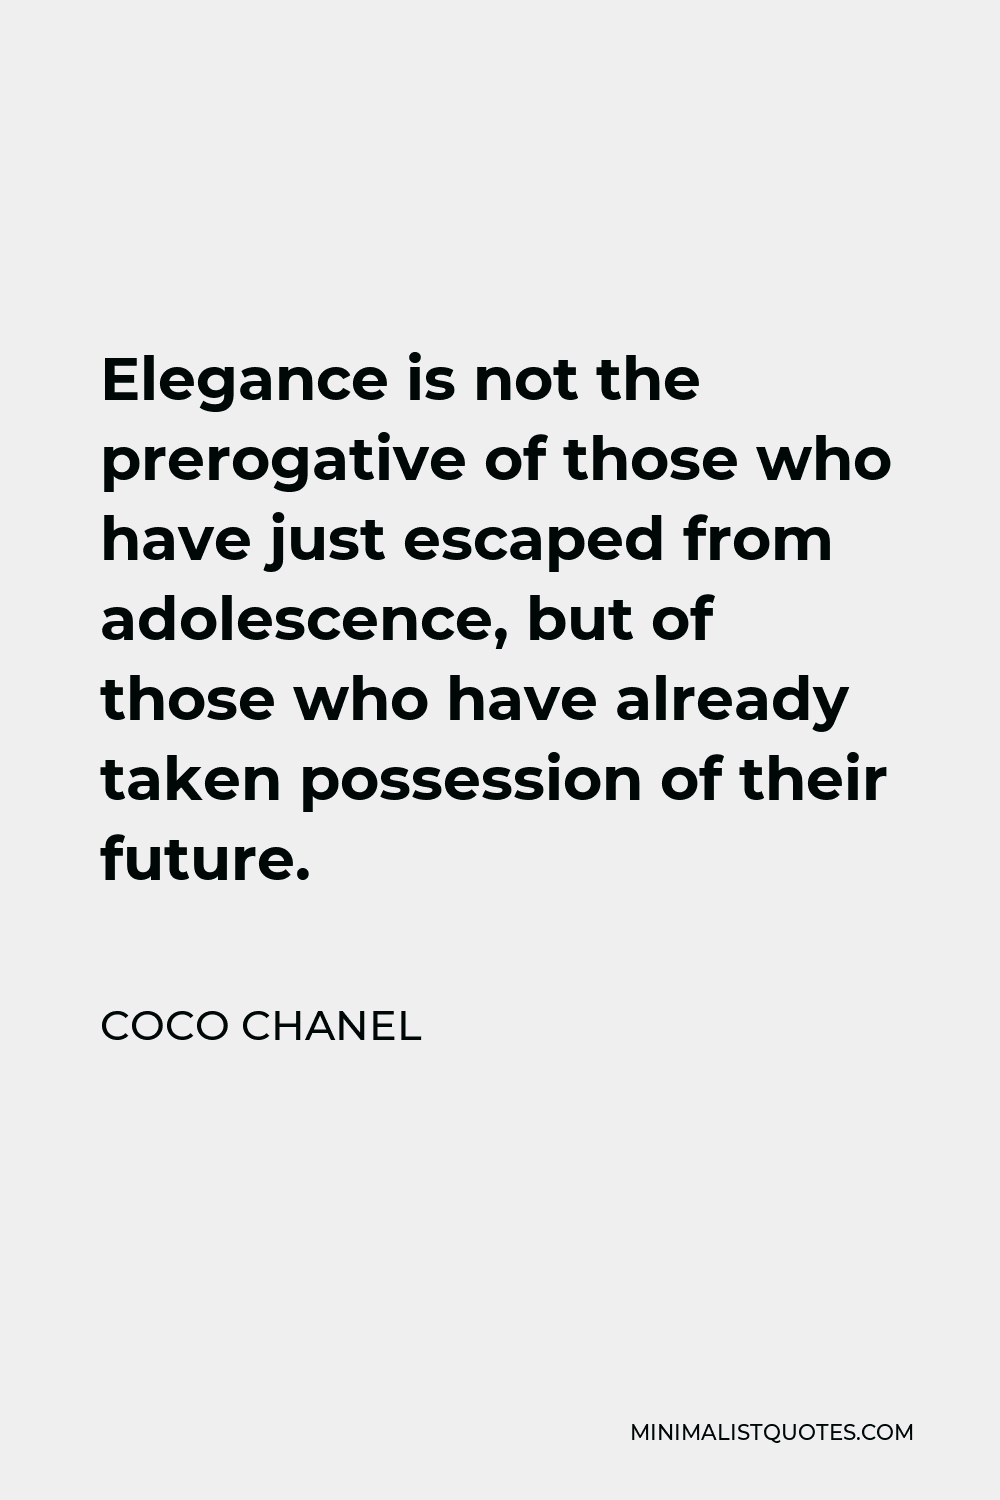 Coco Chanel Quote - Elegance is not the prerogative of those who have just escaped from adolescence, but of those who have already taken possession of their future.